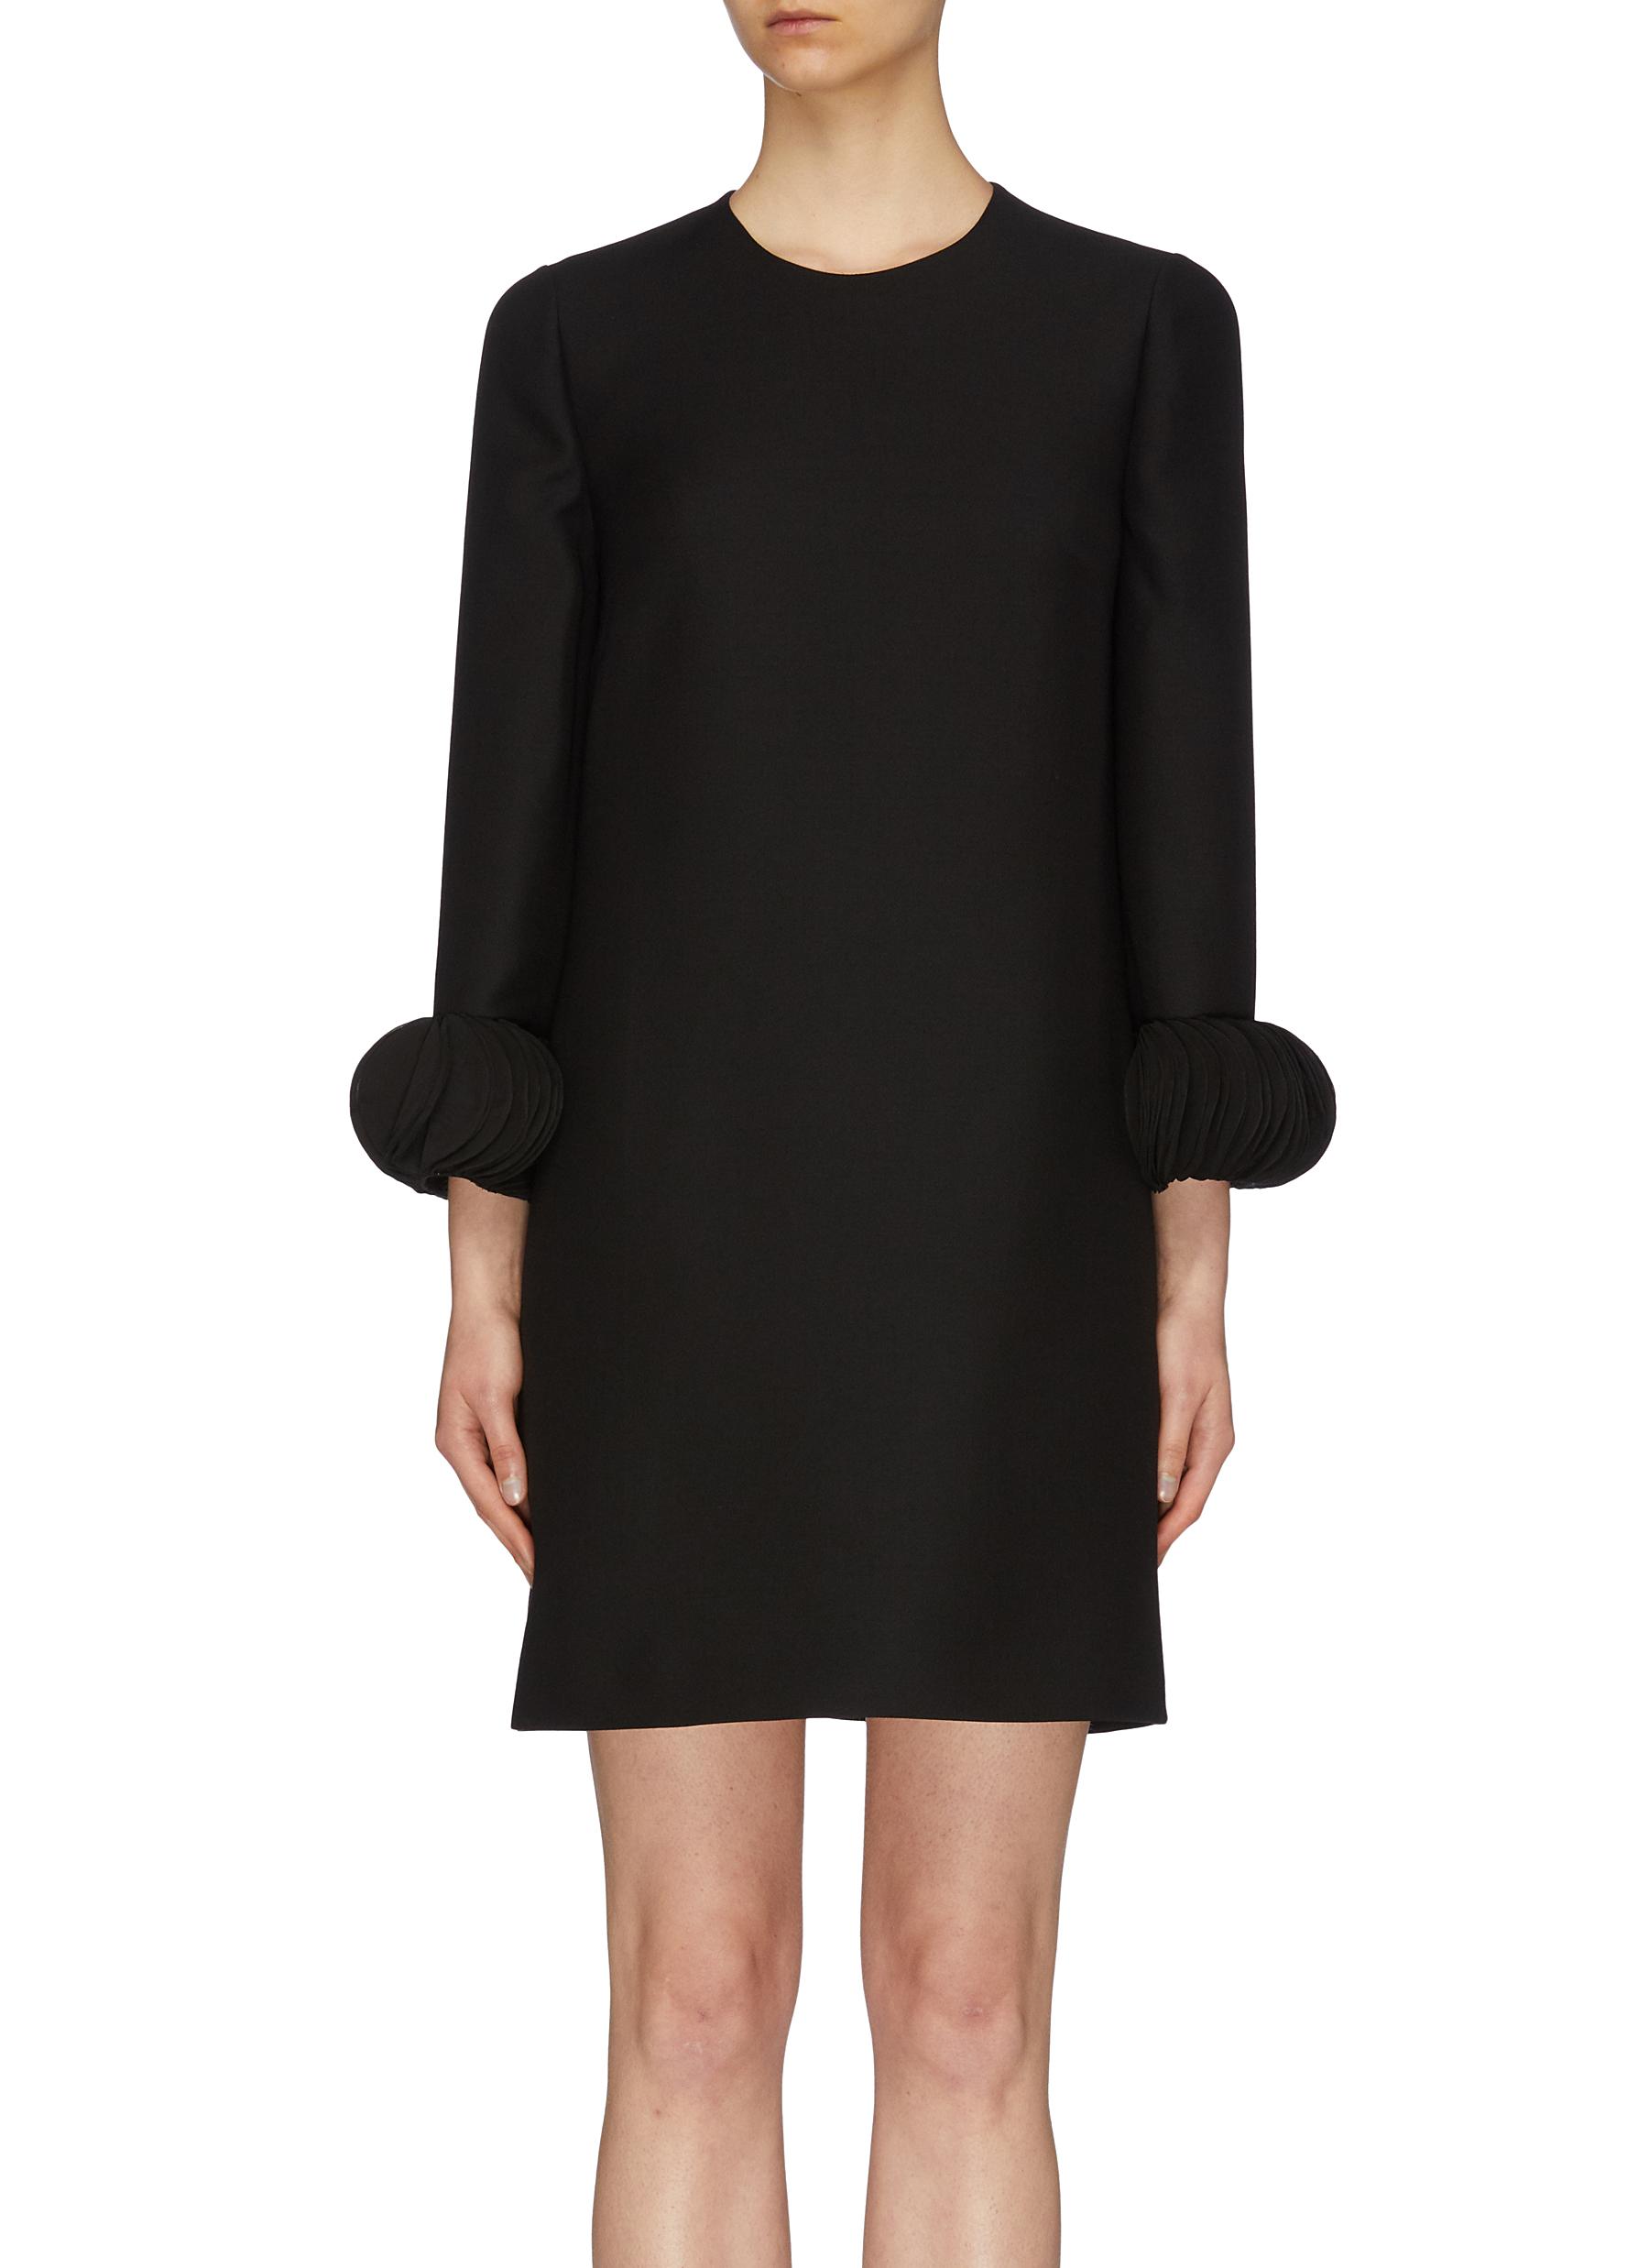 Pagine embroidered cuff virgin wool-silk crepe dress by Valentino